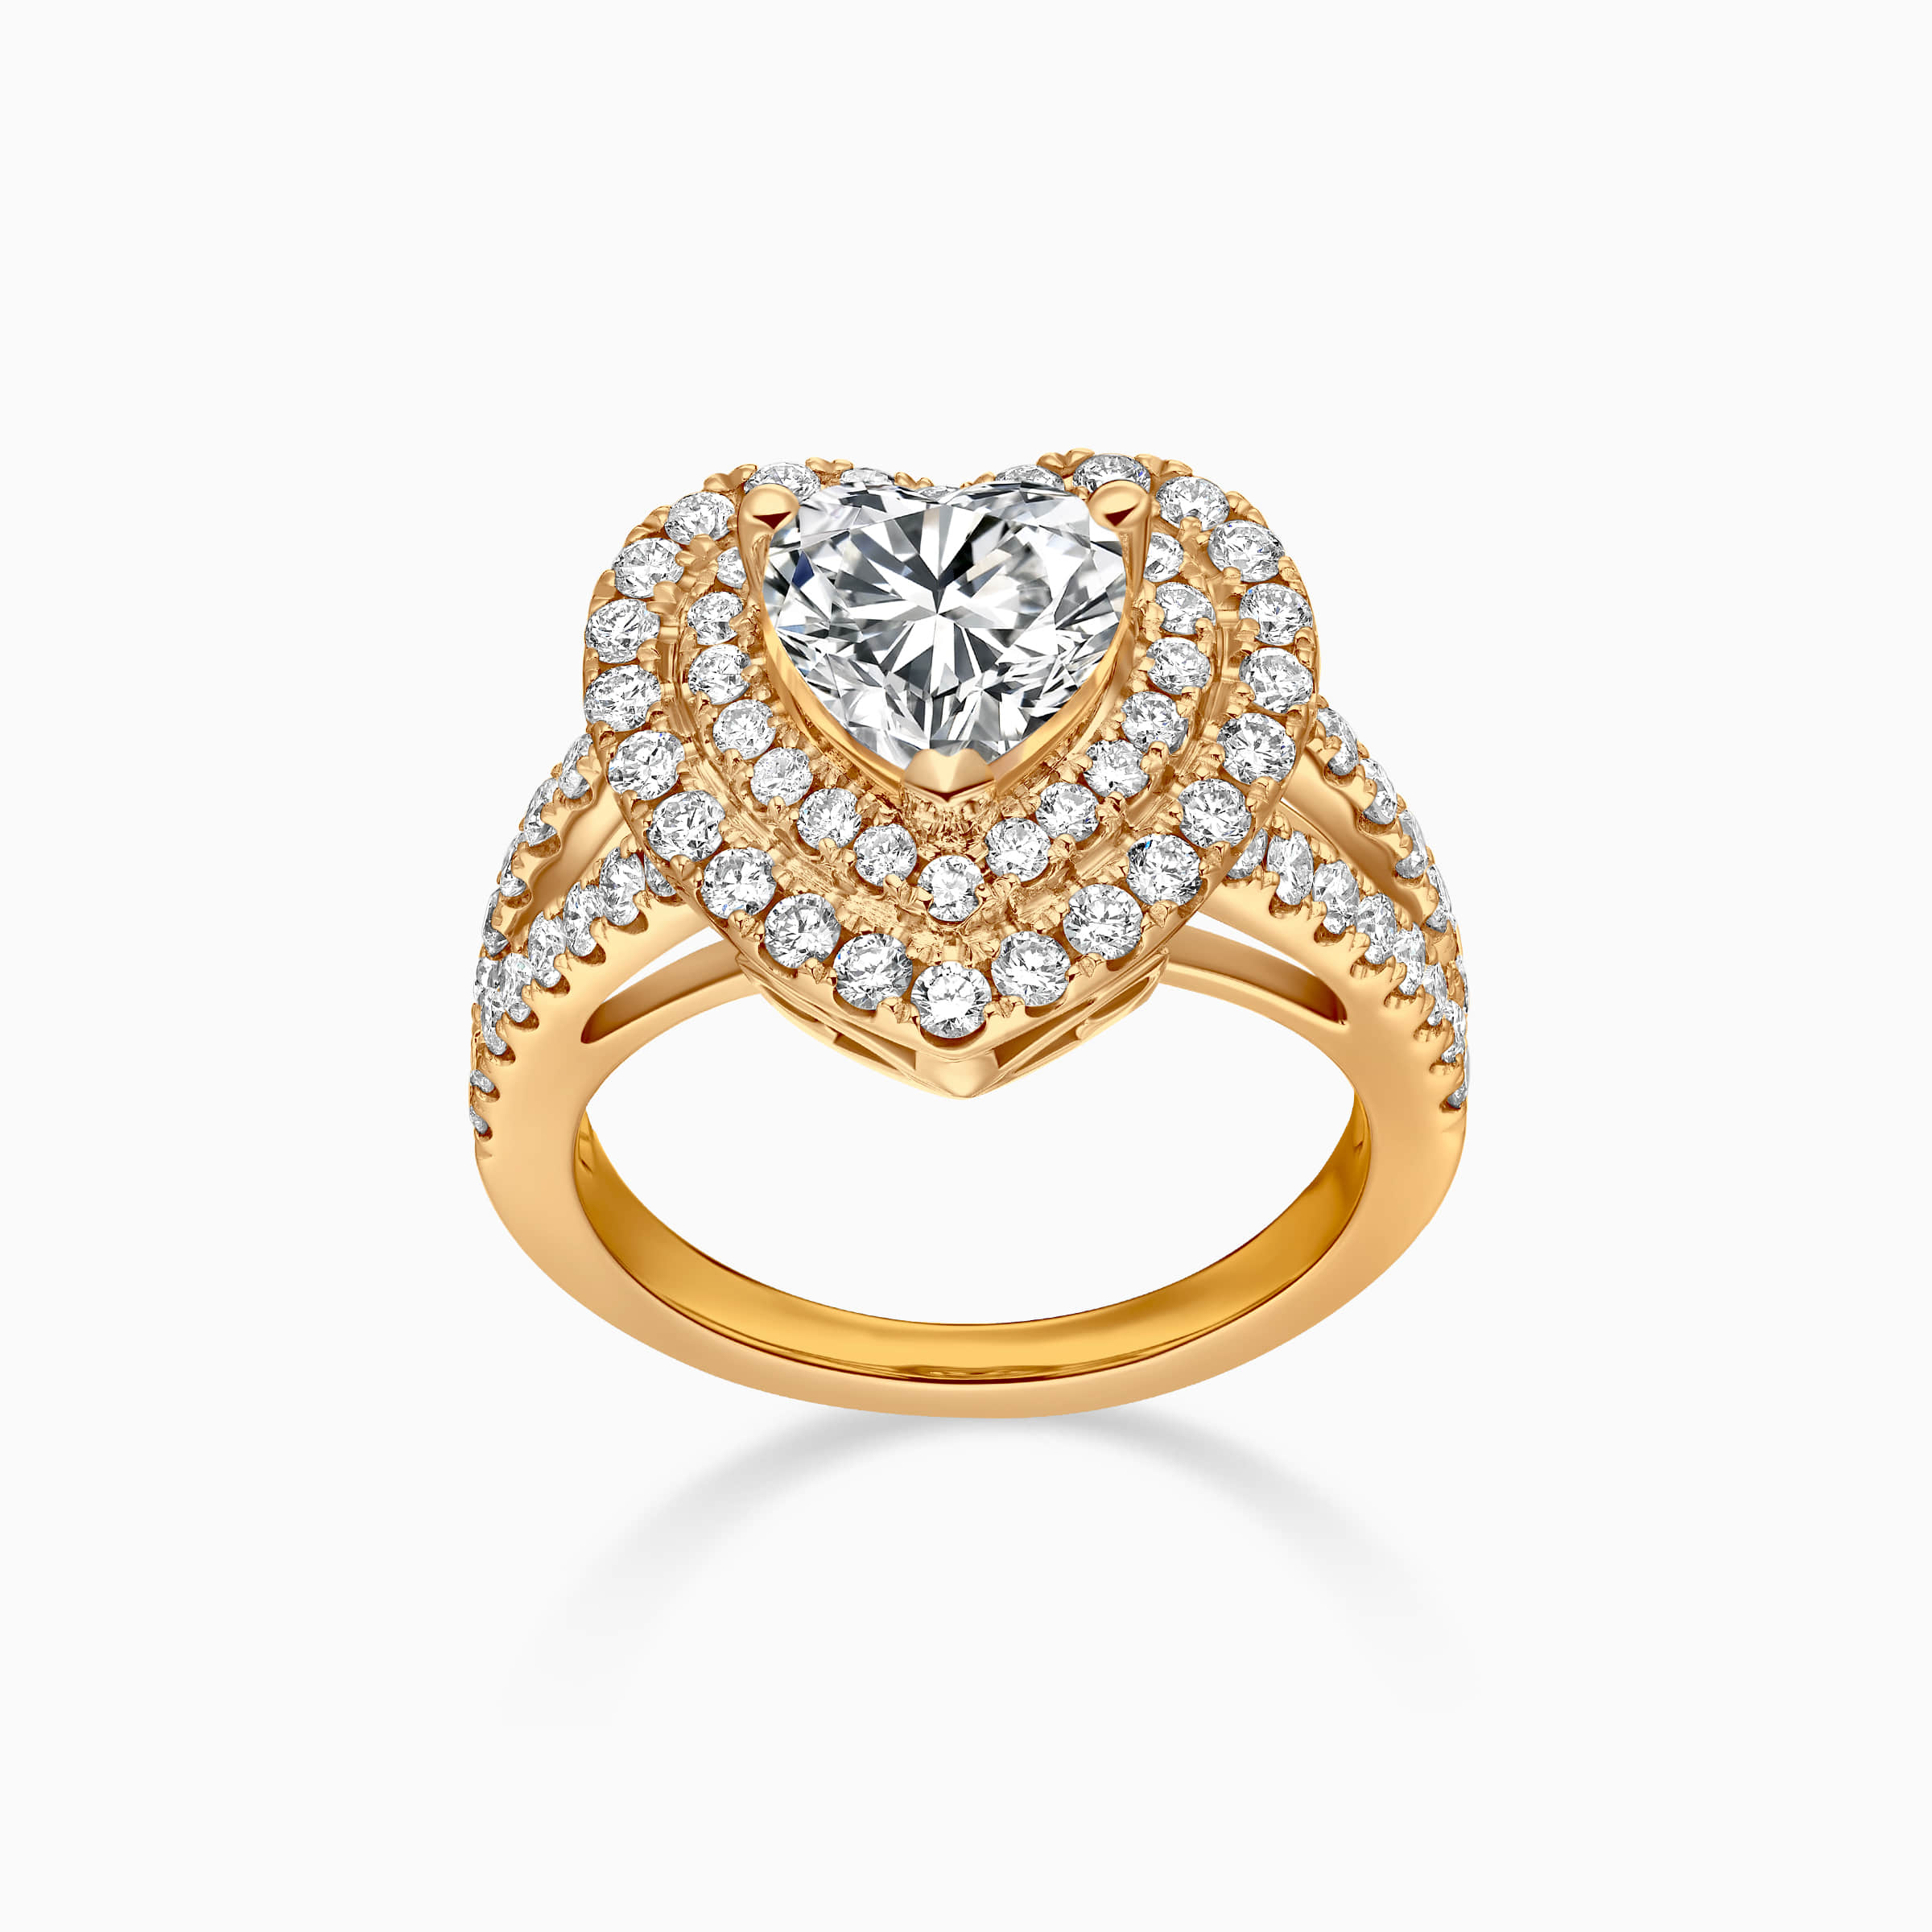 Darry Ring double halo heart promise ring in yellow gold